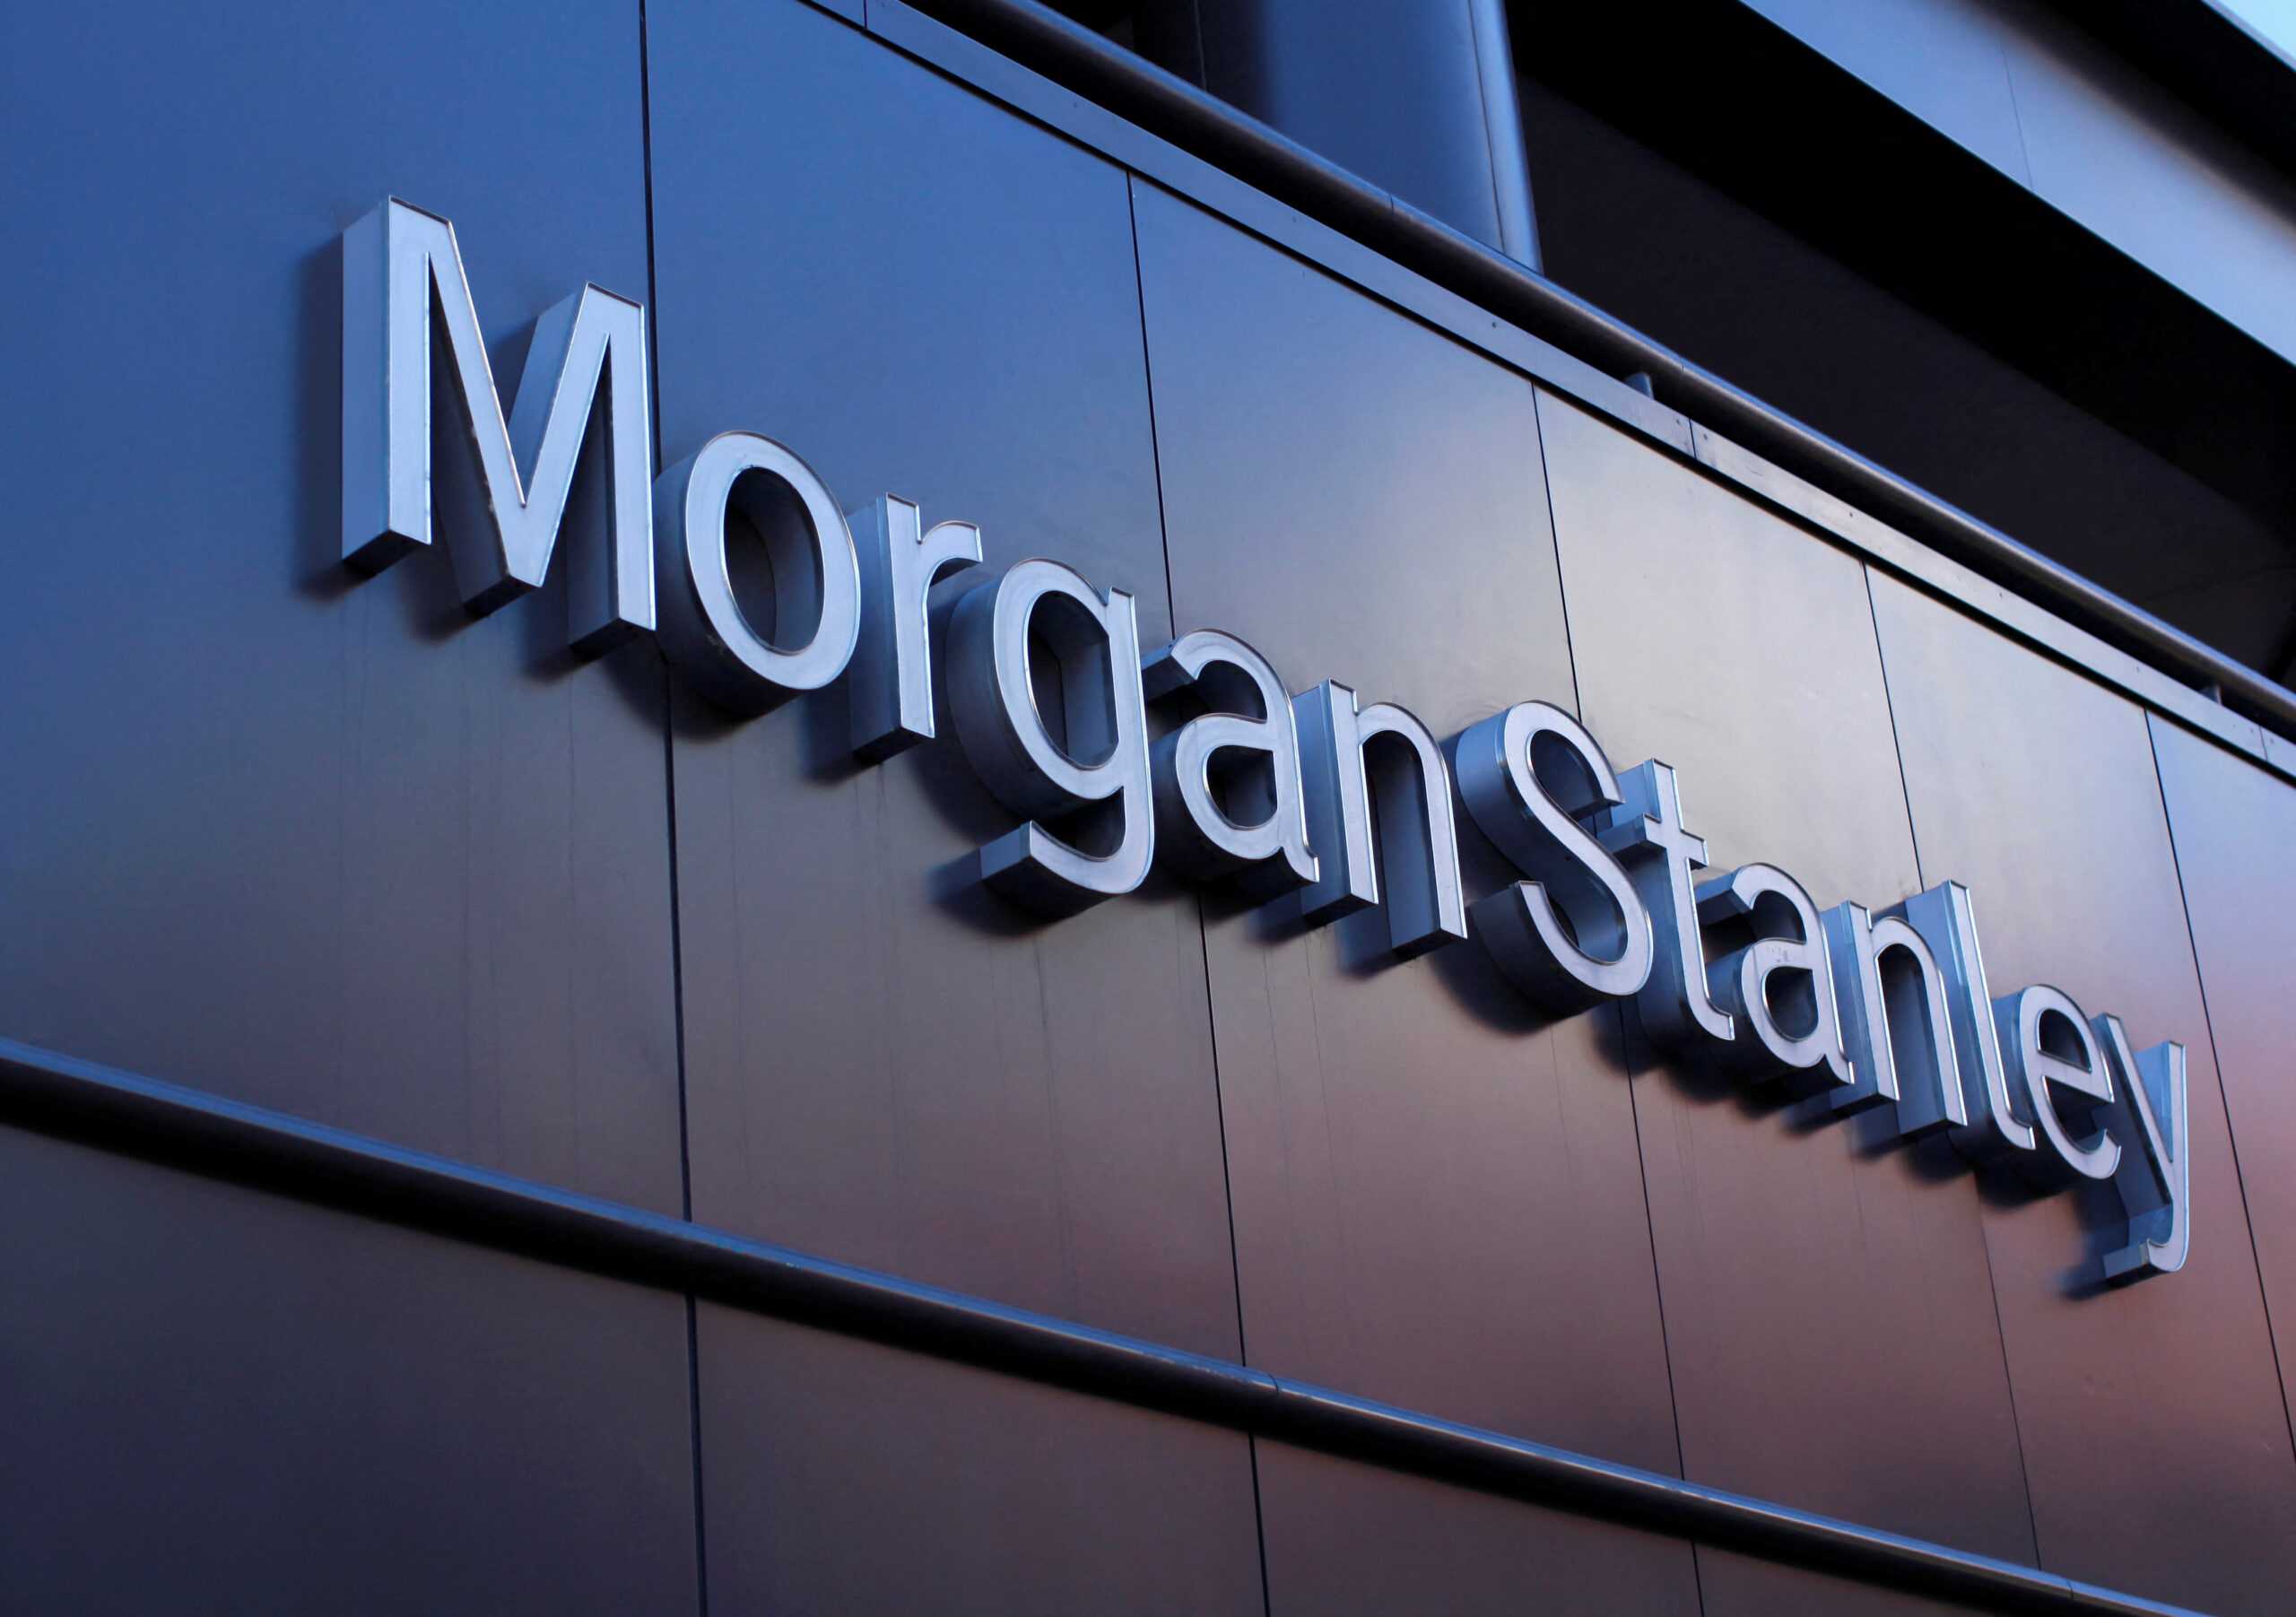 Morgan Stanley downgrades Egypt’s sovereign credit rating to “dislike stance”